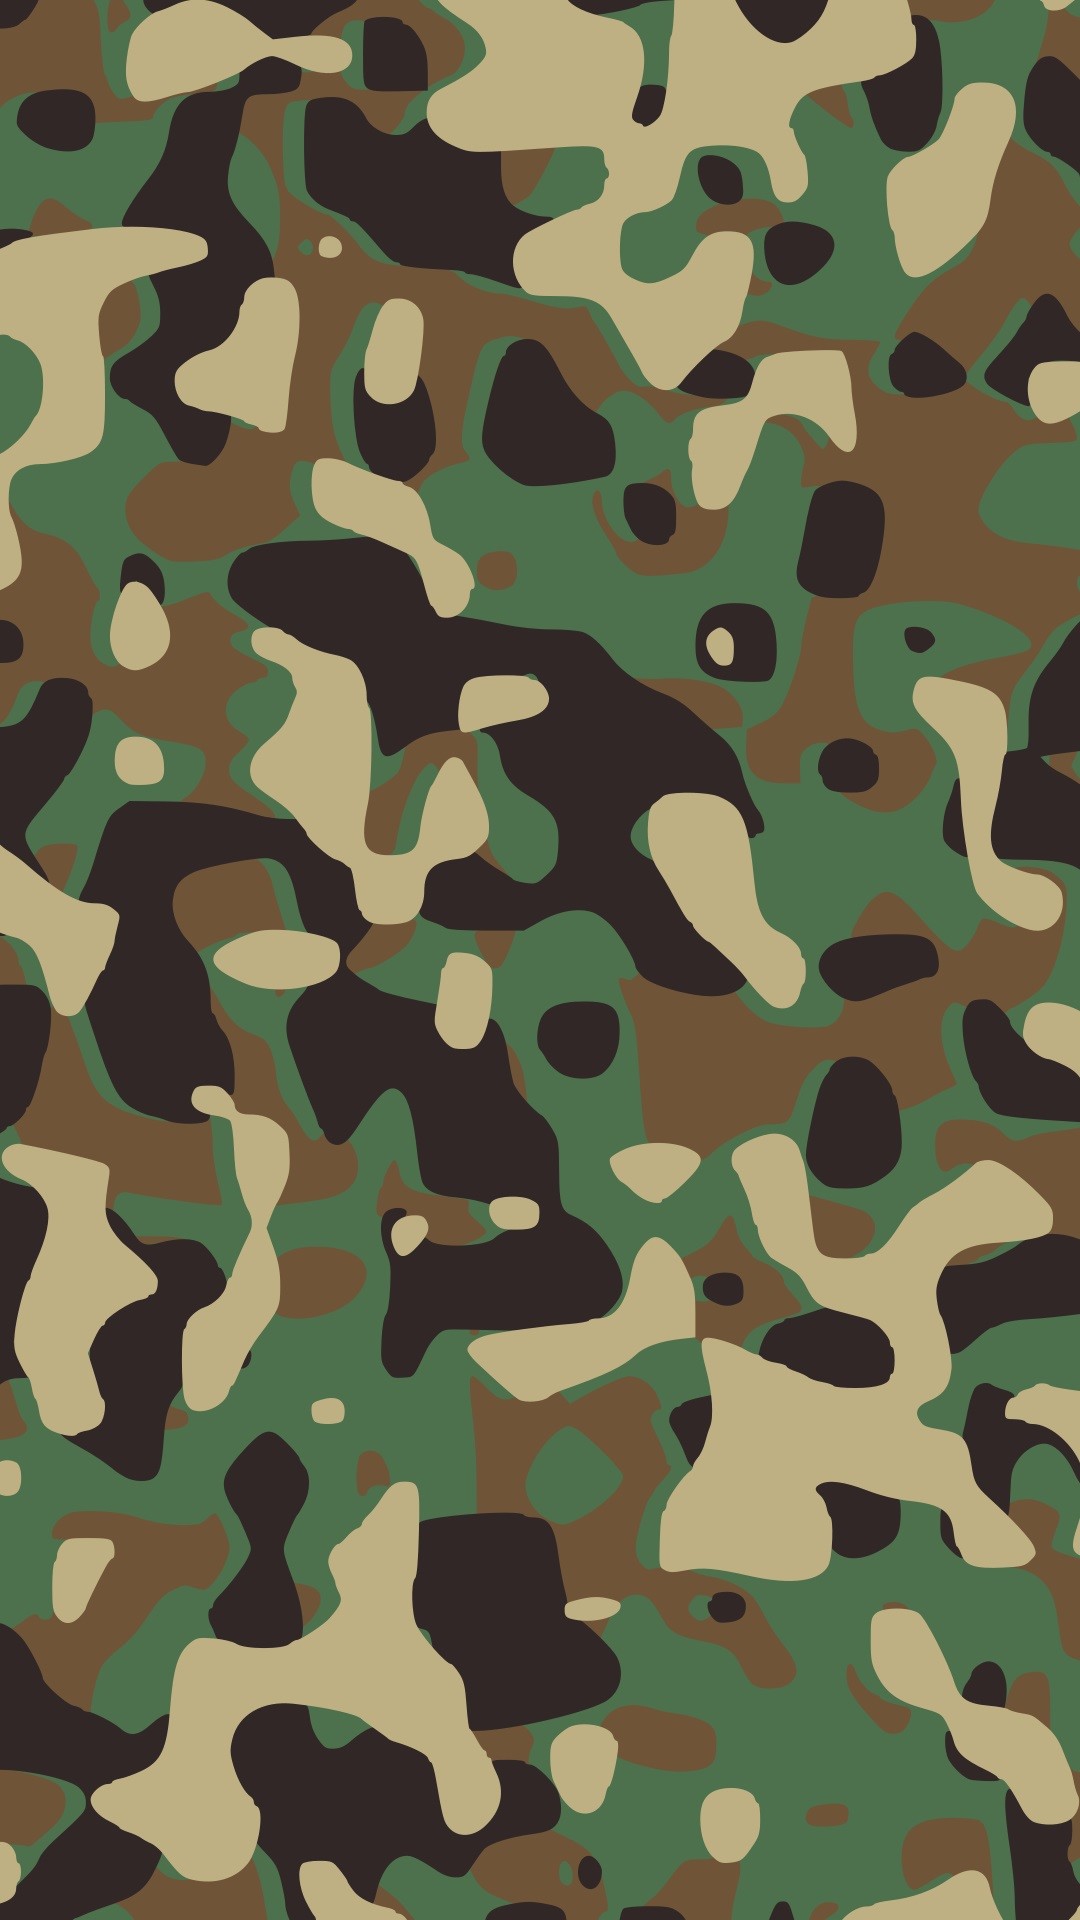 Camouflage wallpaper for iPhone or Android. Tags: camo, hunting, army,  backgrounds